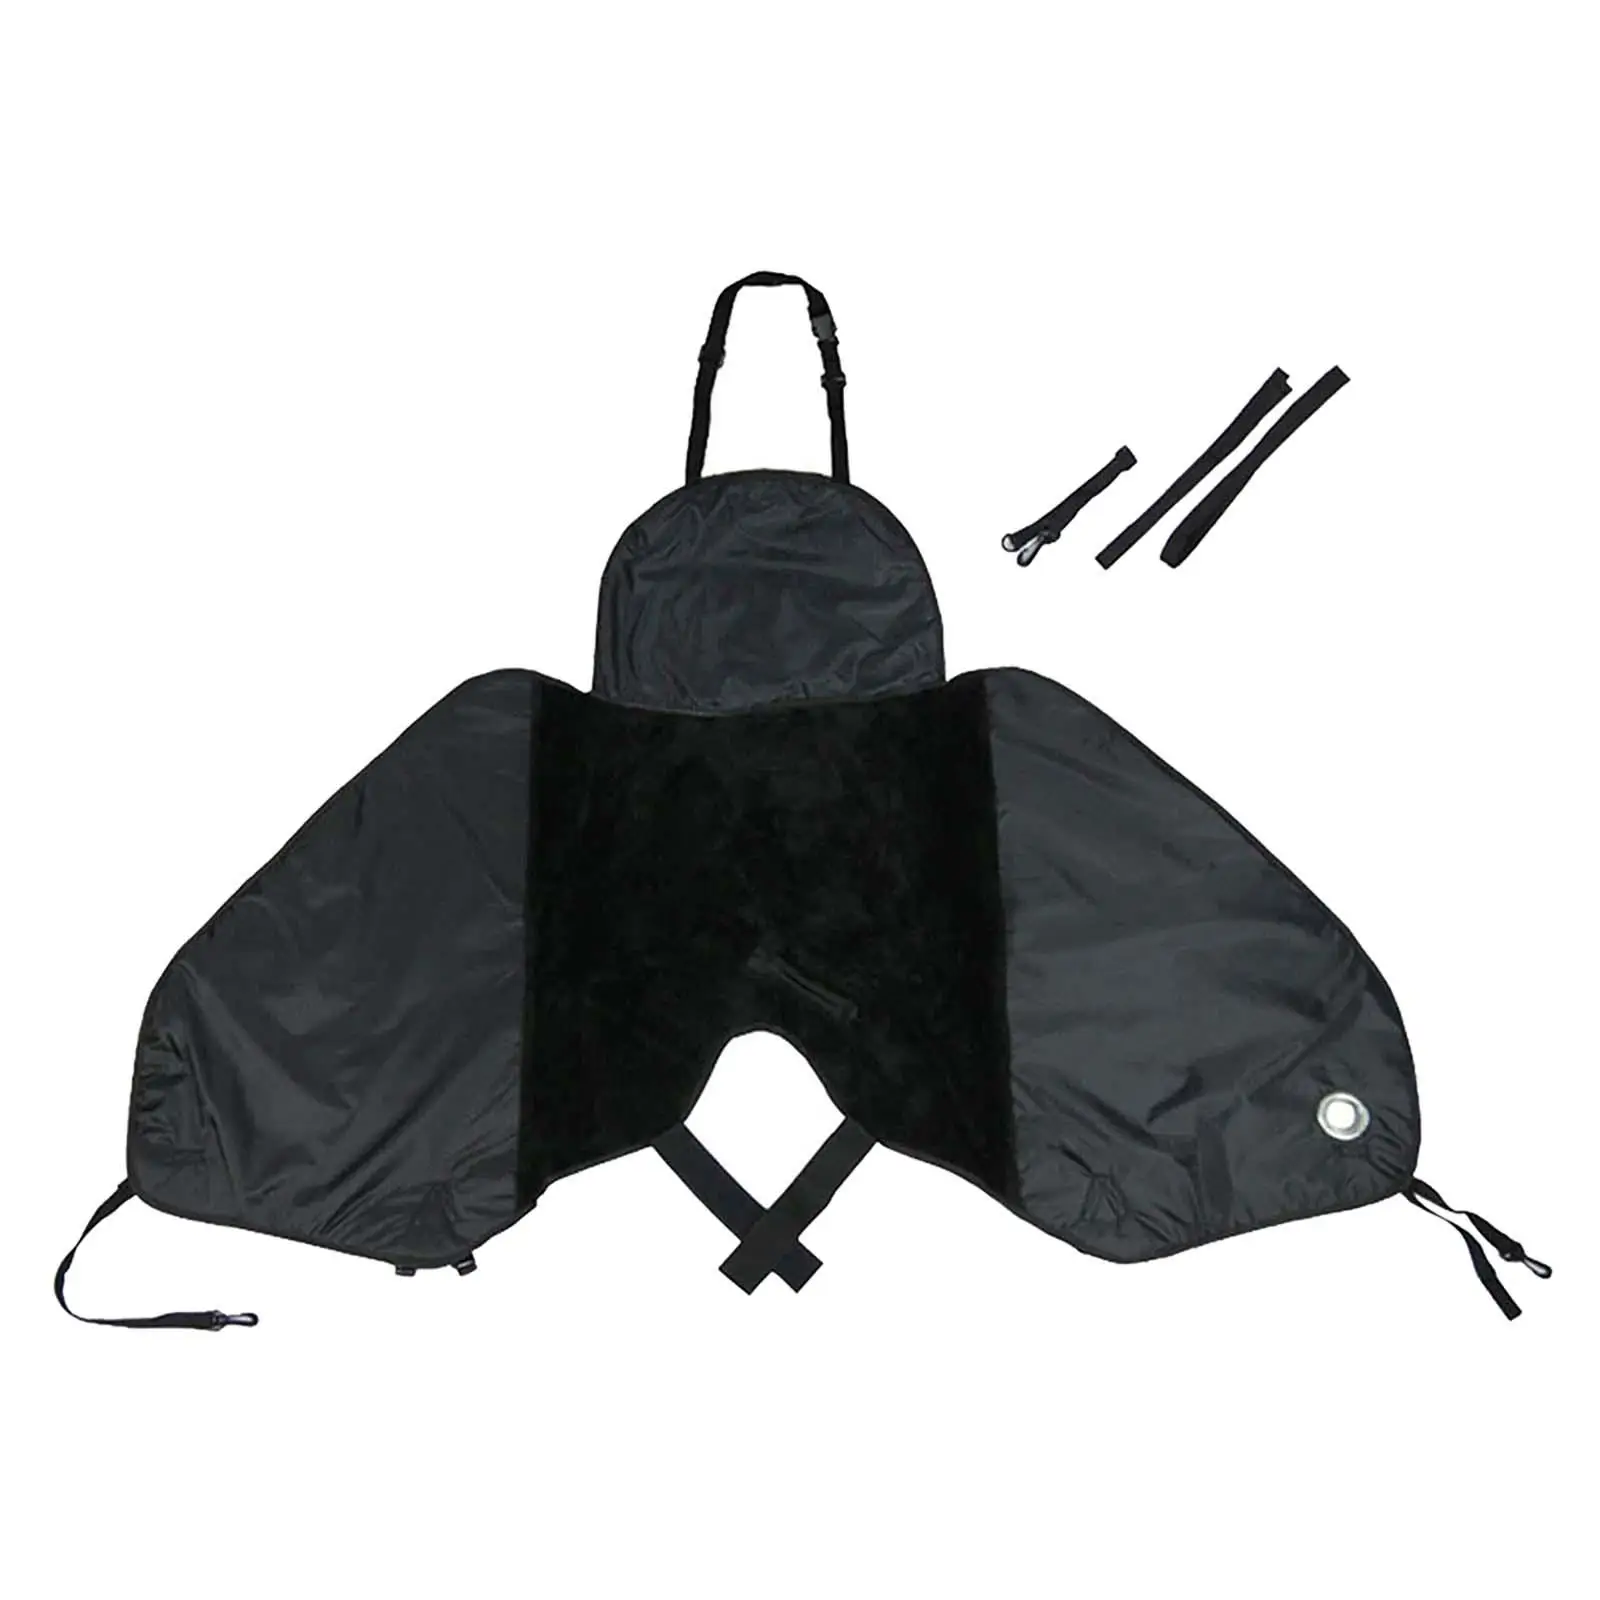 Motorcycle Windproof Quilt Multifunction Tarpaulin Lap Cover Reusable Accessories Warm Riding Apron Universal Windshield